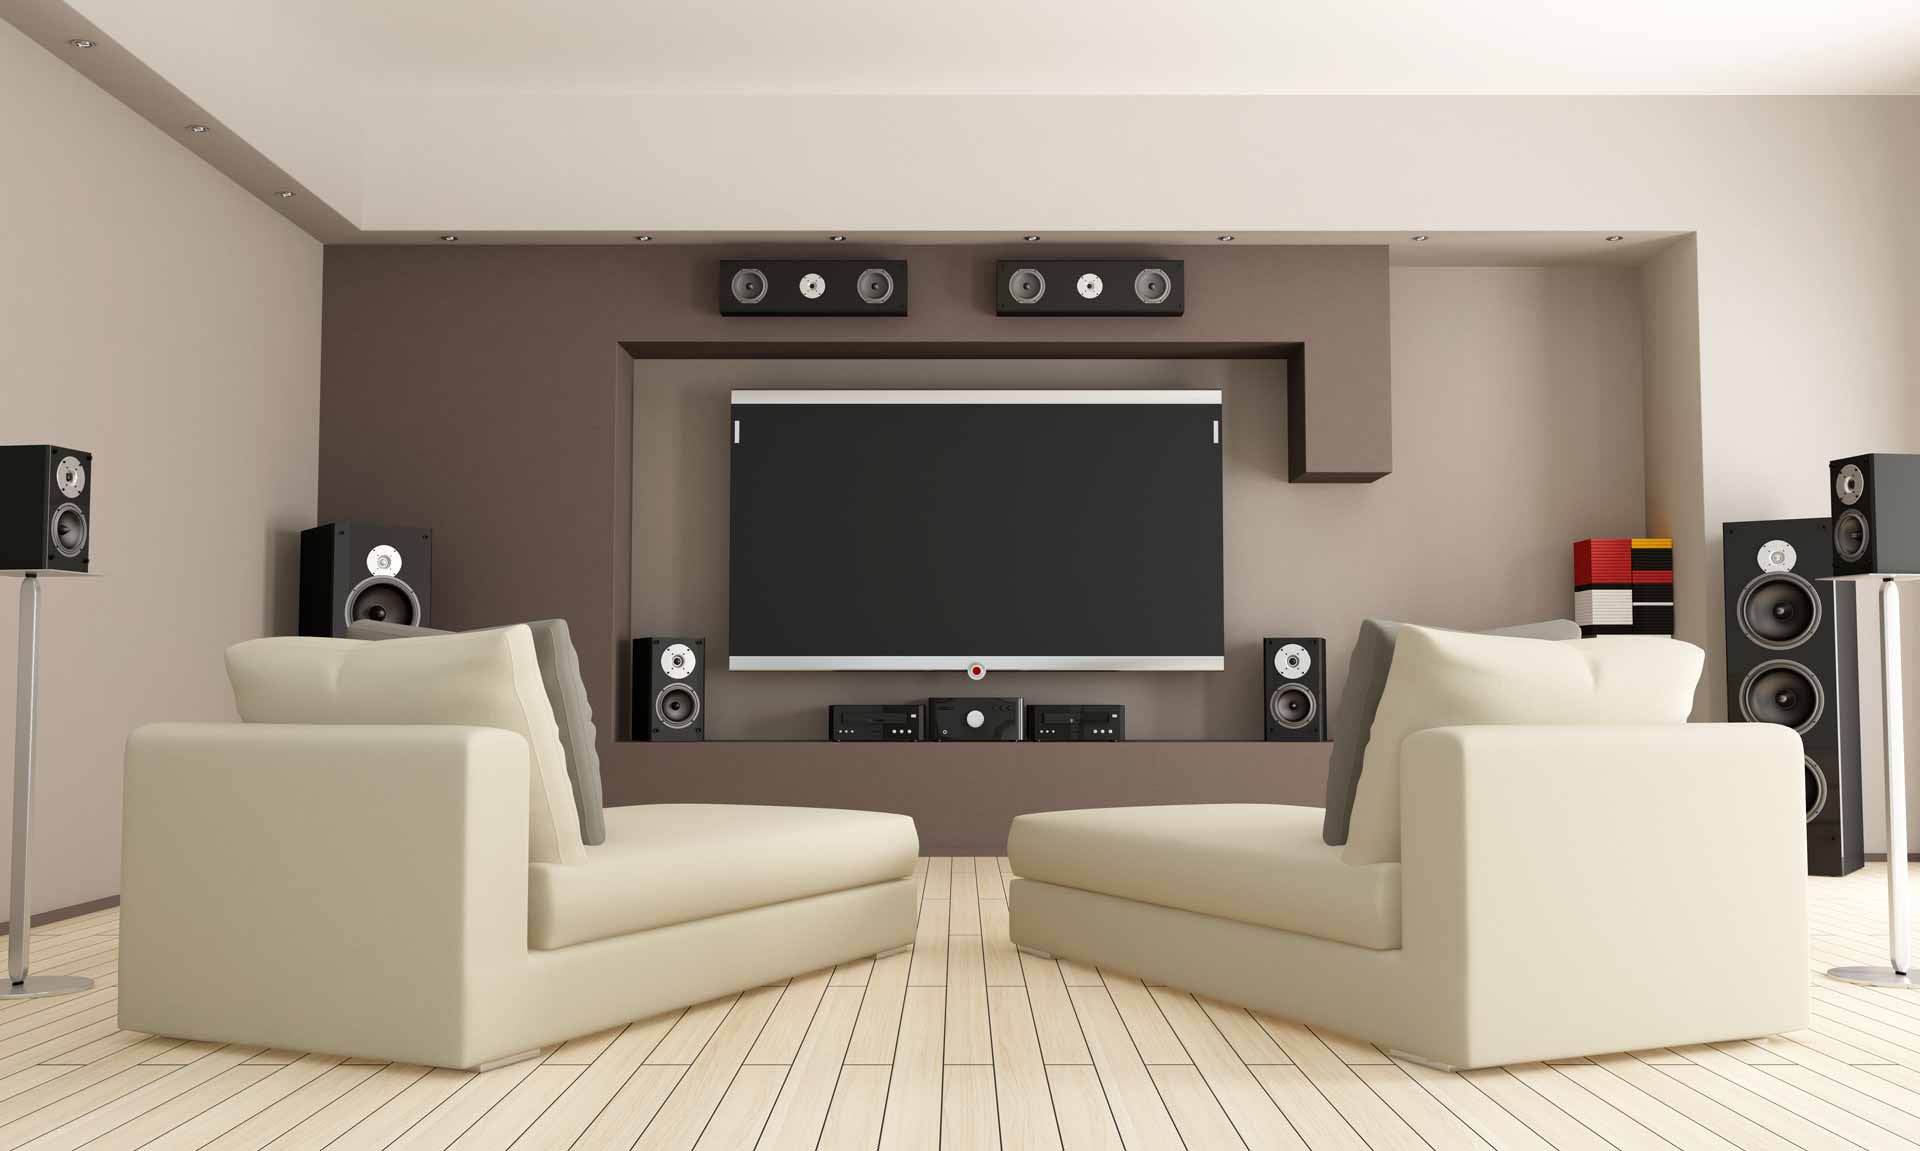 Home audio video system